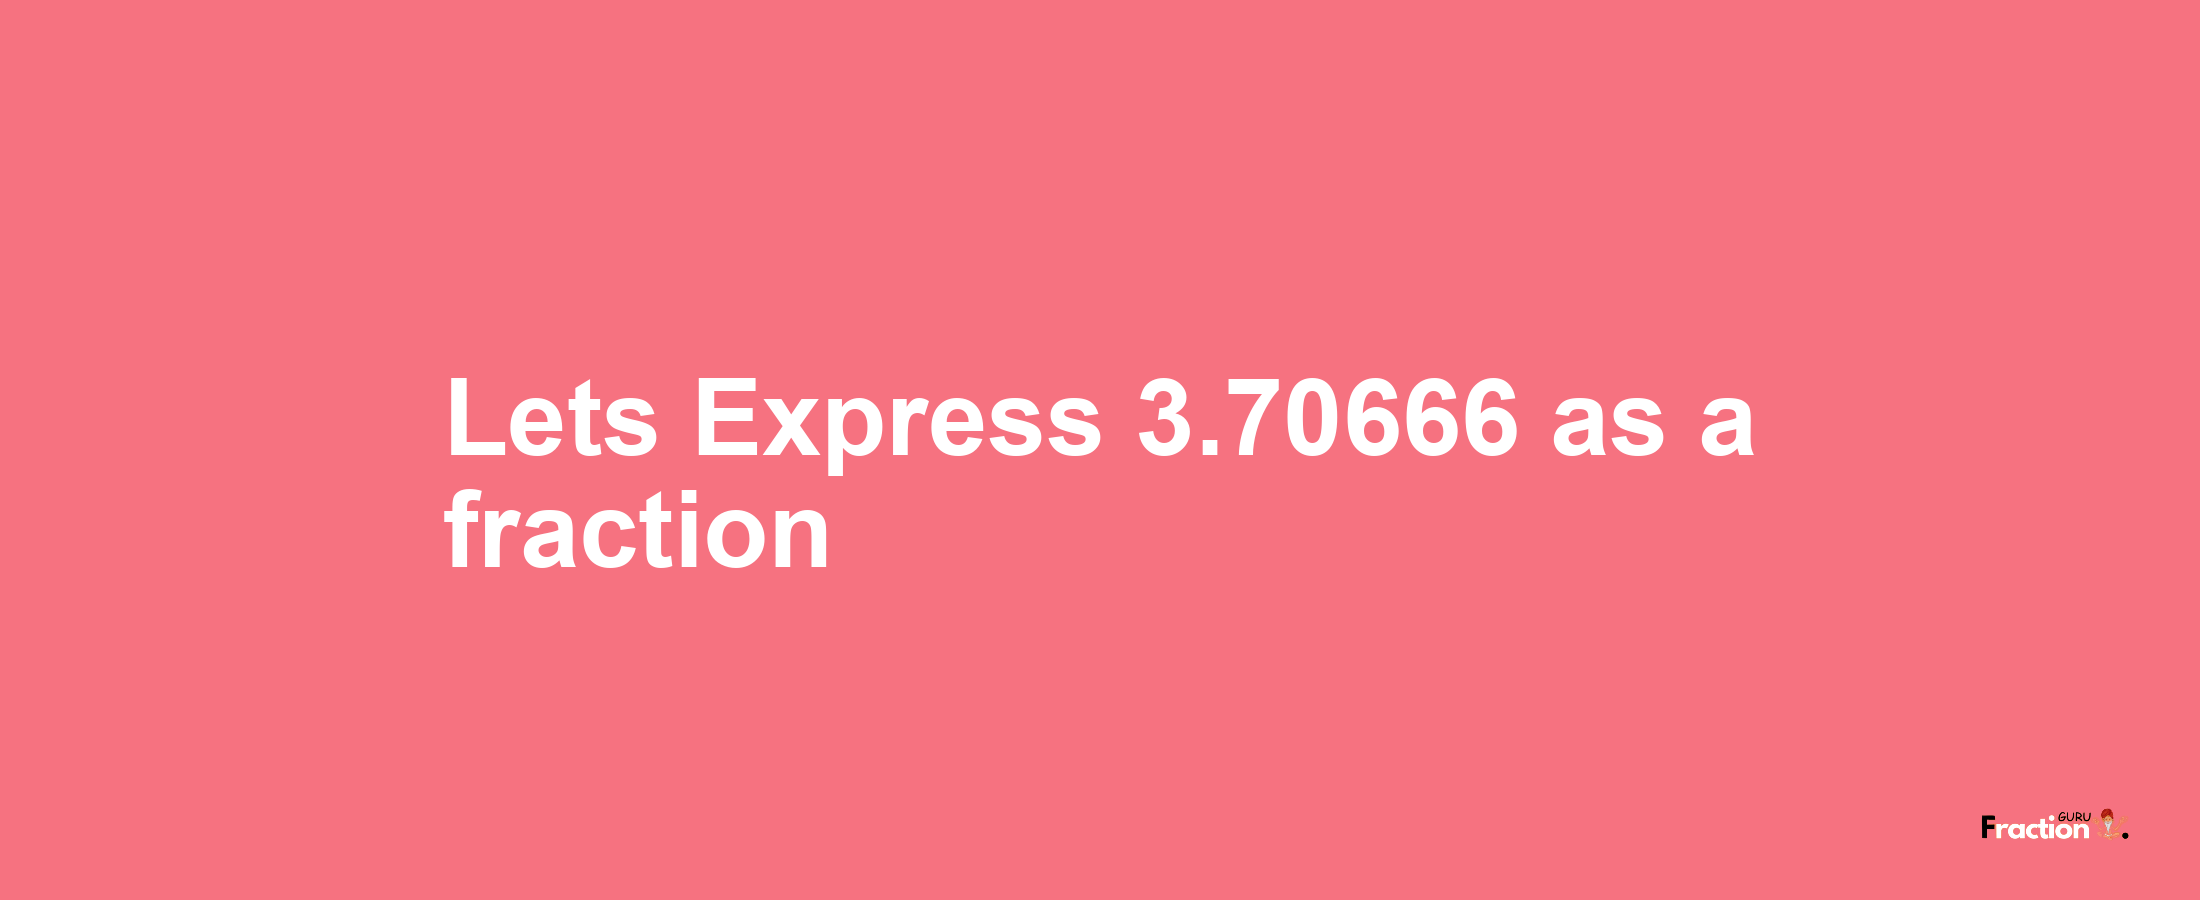 Lets Express 3.70666 as afraction